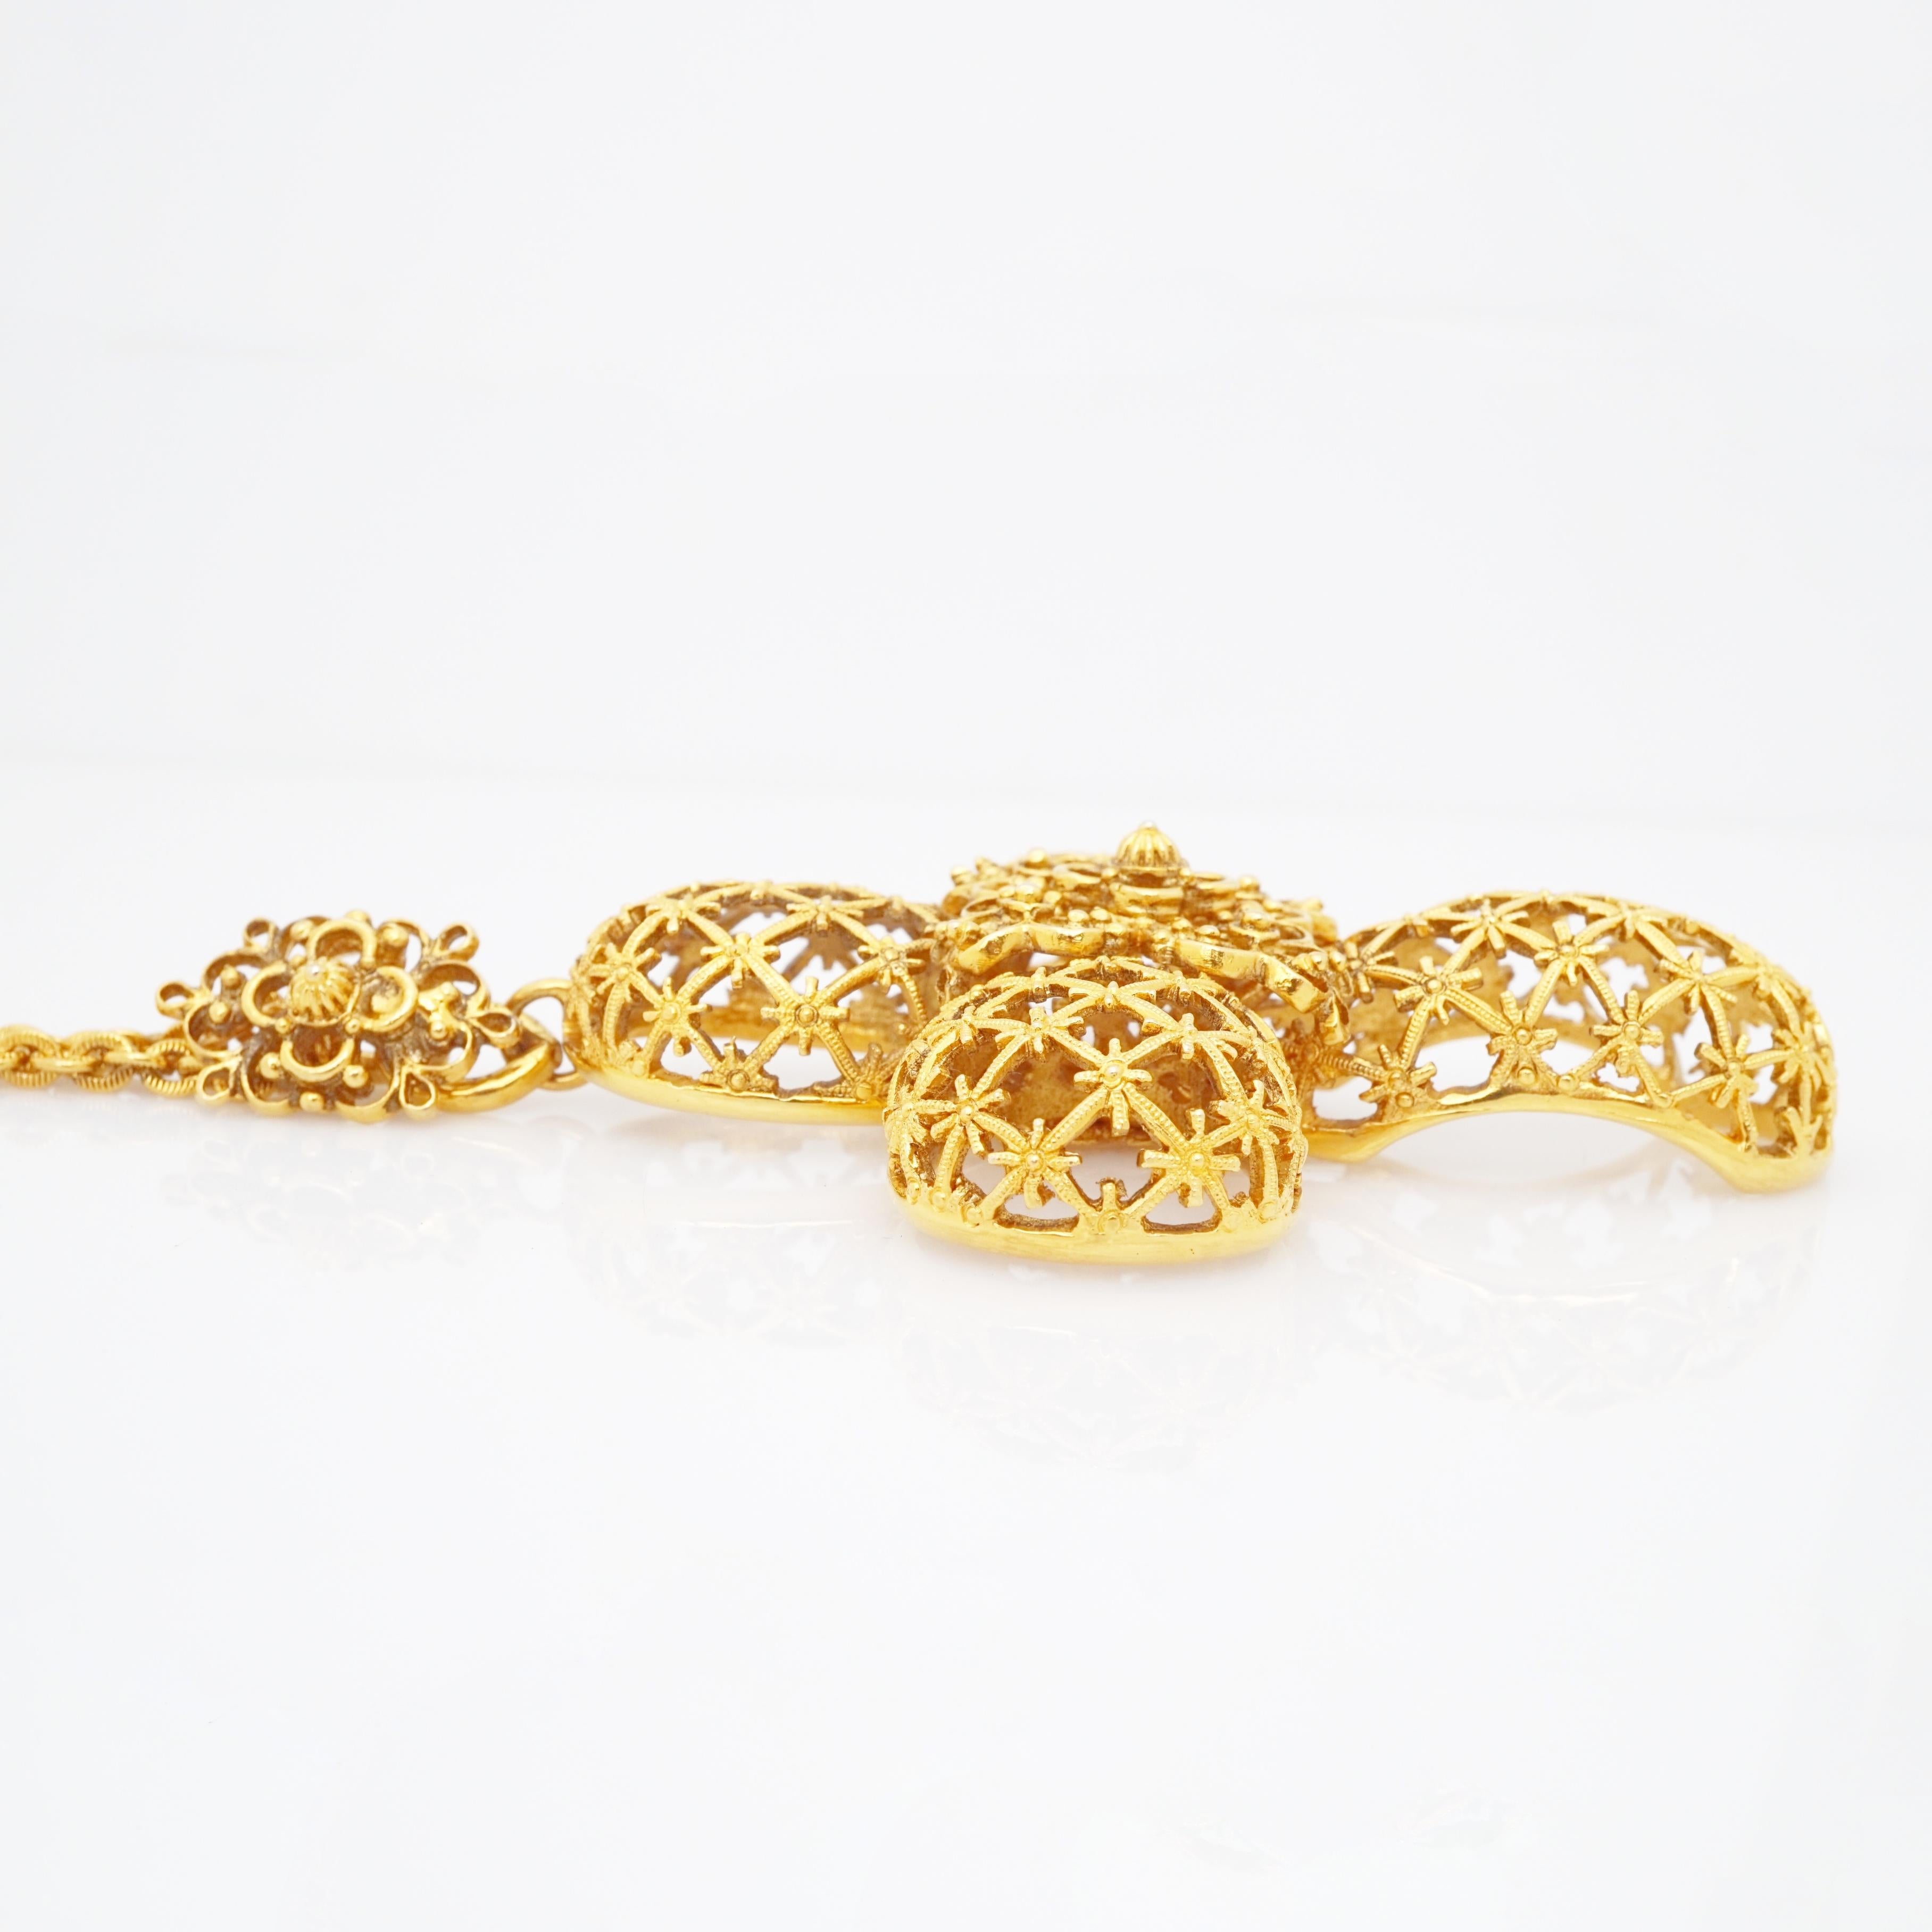 Modern Gilded Filigree Cross Pendant Statement Necklace By Jose & Maria Barrera, 1990s For Sale